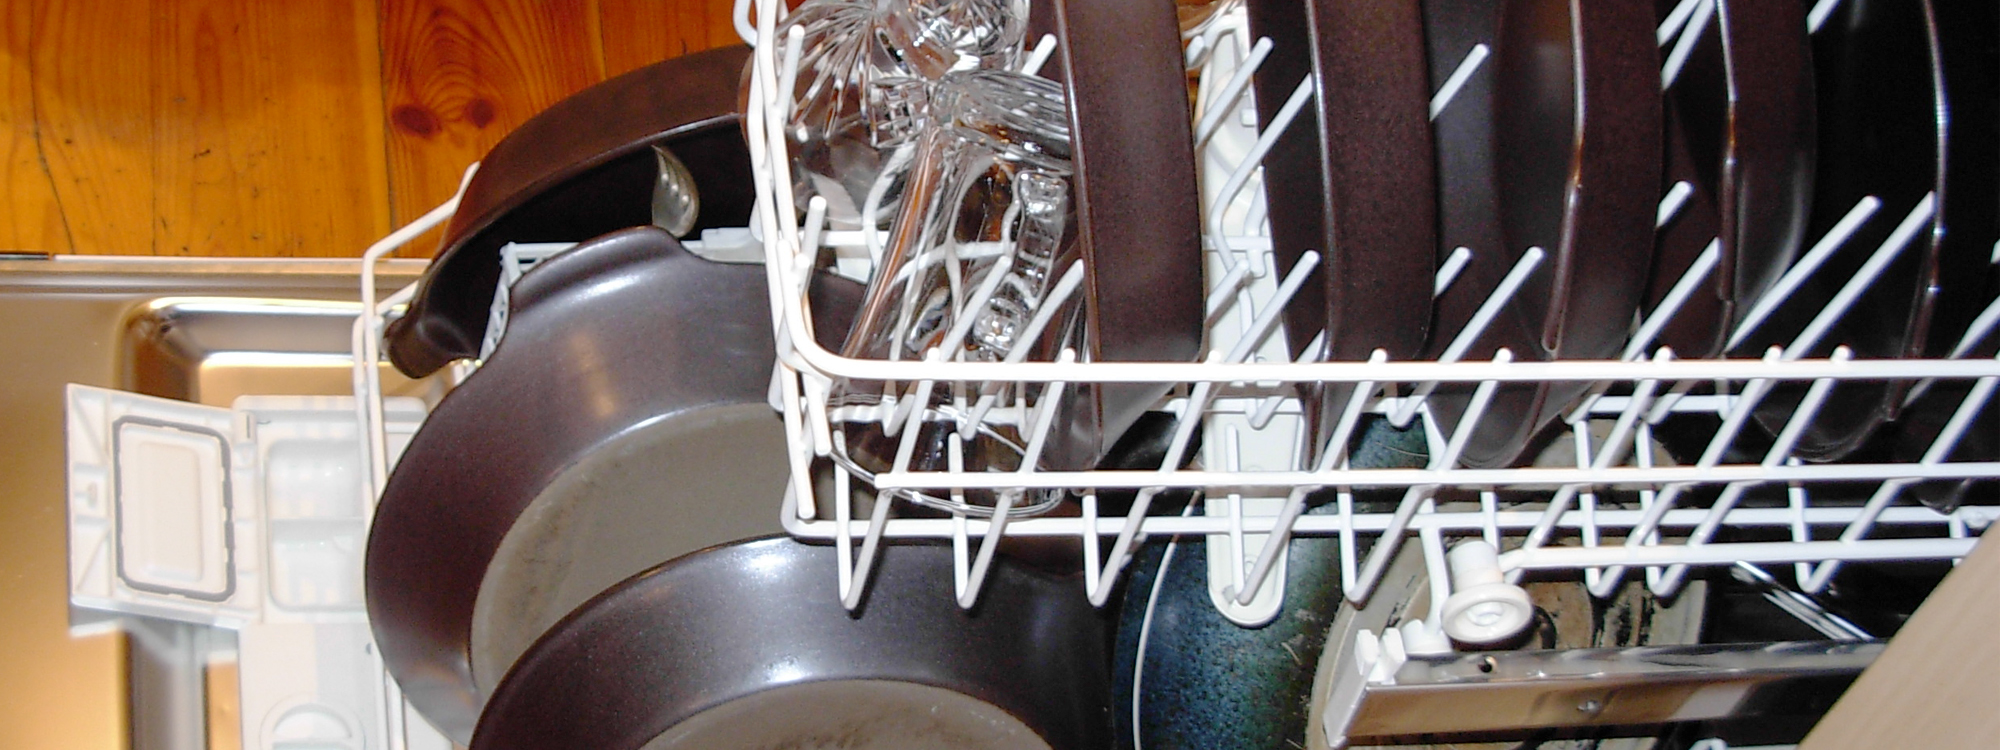 Dishwashers are crazy things